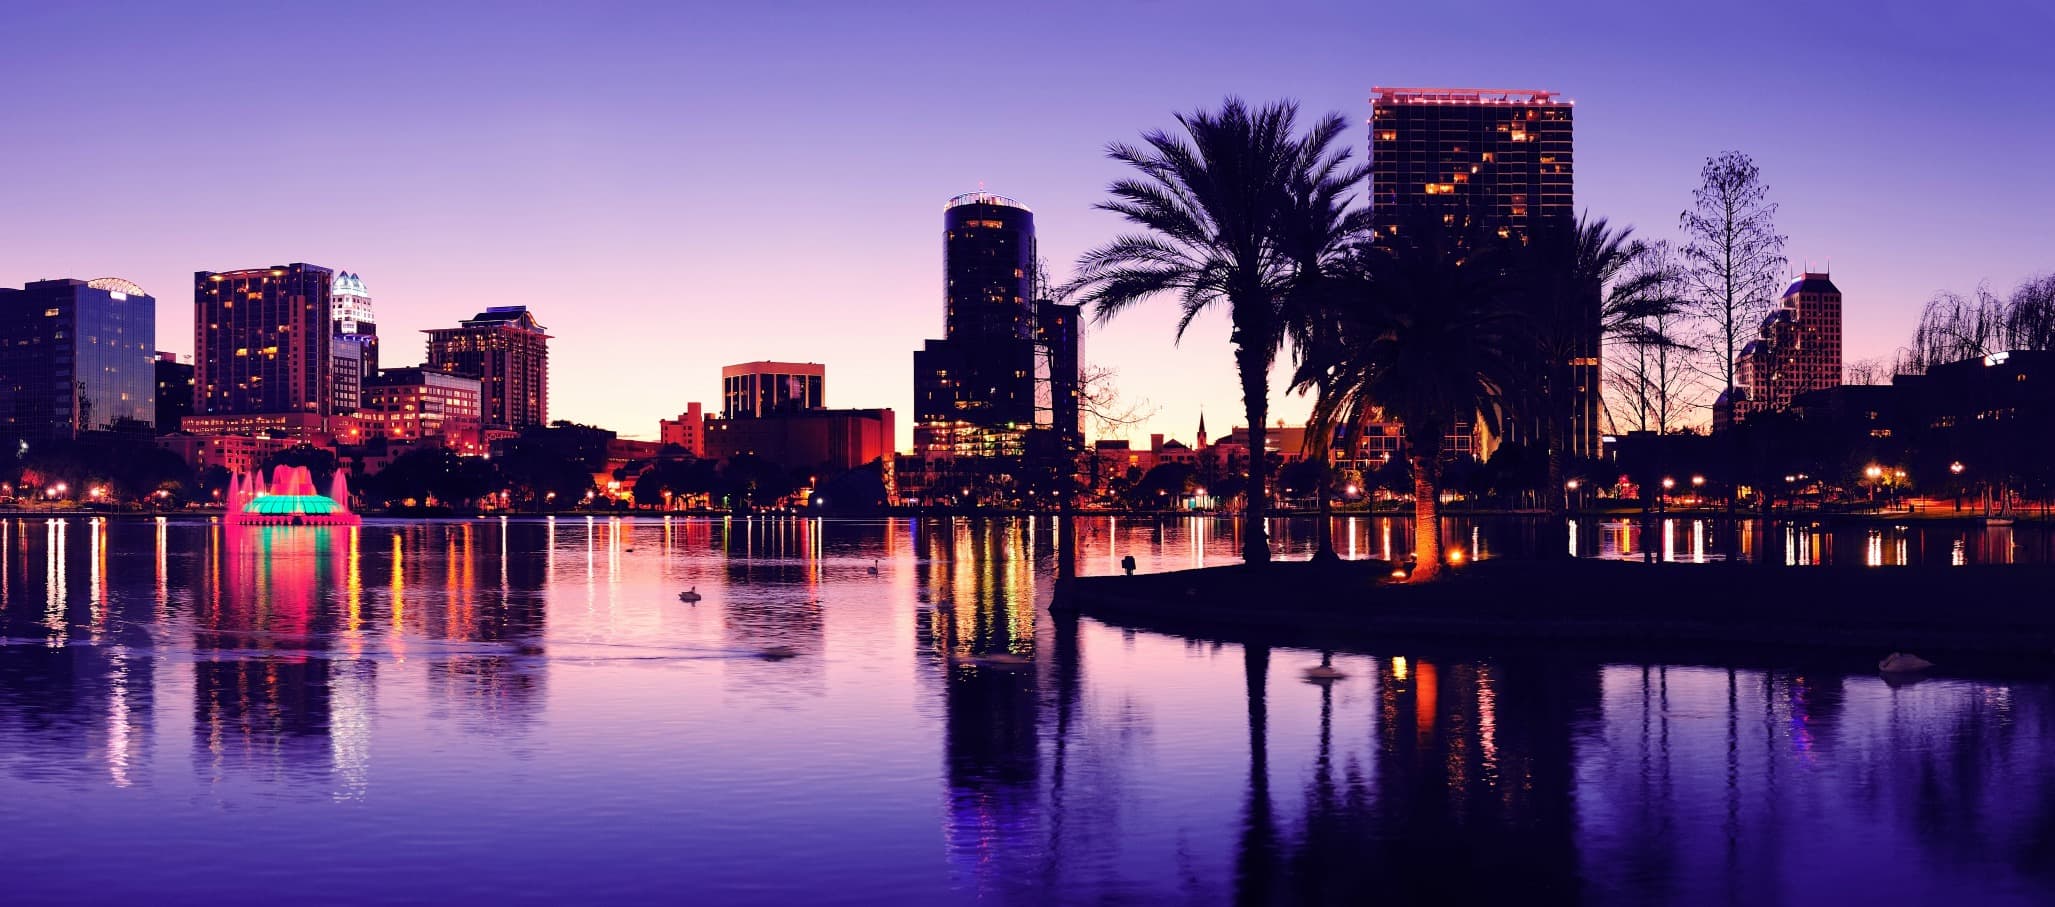 Orlando downtown skyline panorama silhouette over Lake Eola at dusk with urban skyscrapers.; Shutterstock ID 133238030